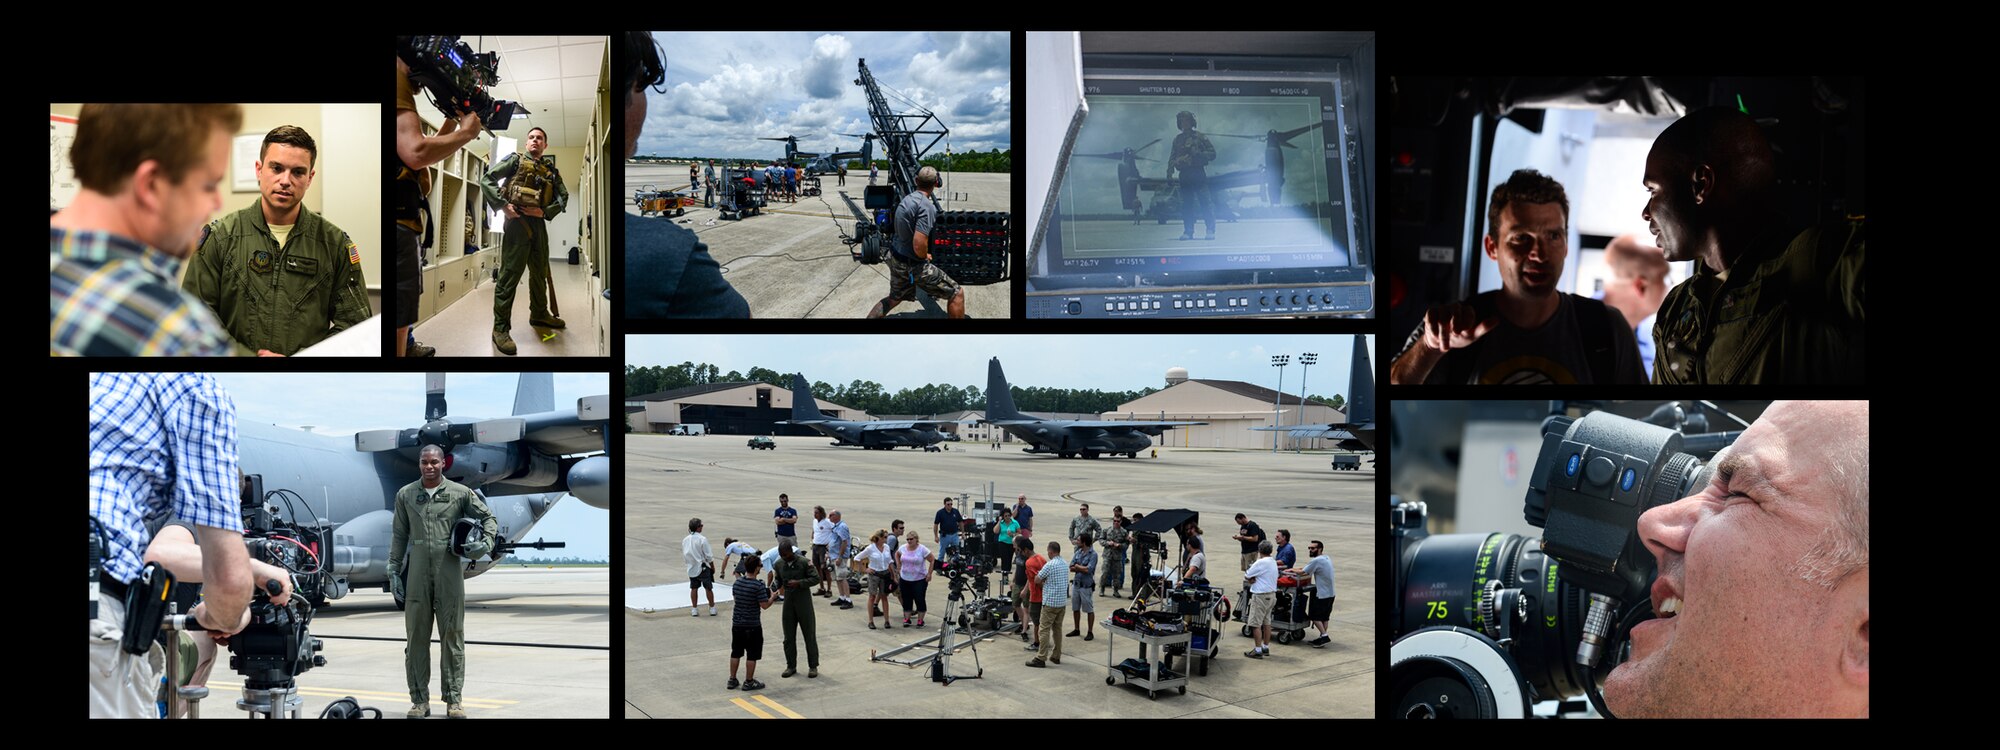 The Air Force Recruiting Service and GSD&M Advertising crew film portions of a new Air Force commercial at Hurlburt Field, Fla., July 9 through 10, 2014. GSD&M Advertising is a company based out of Austin, TX and is contracted by the AFRS to produce TV commercials for the Air Force. (U.S. Air Force photo/Airman 1st Class Jeff Parkinson)